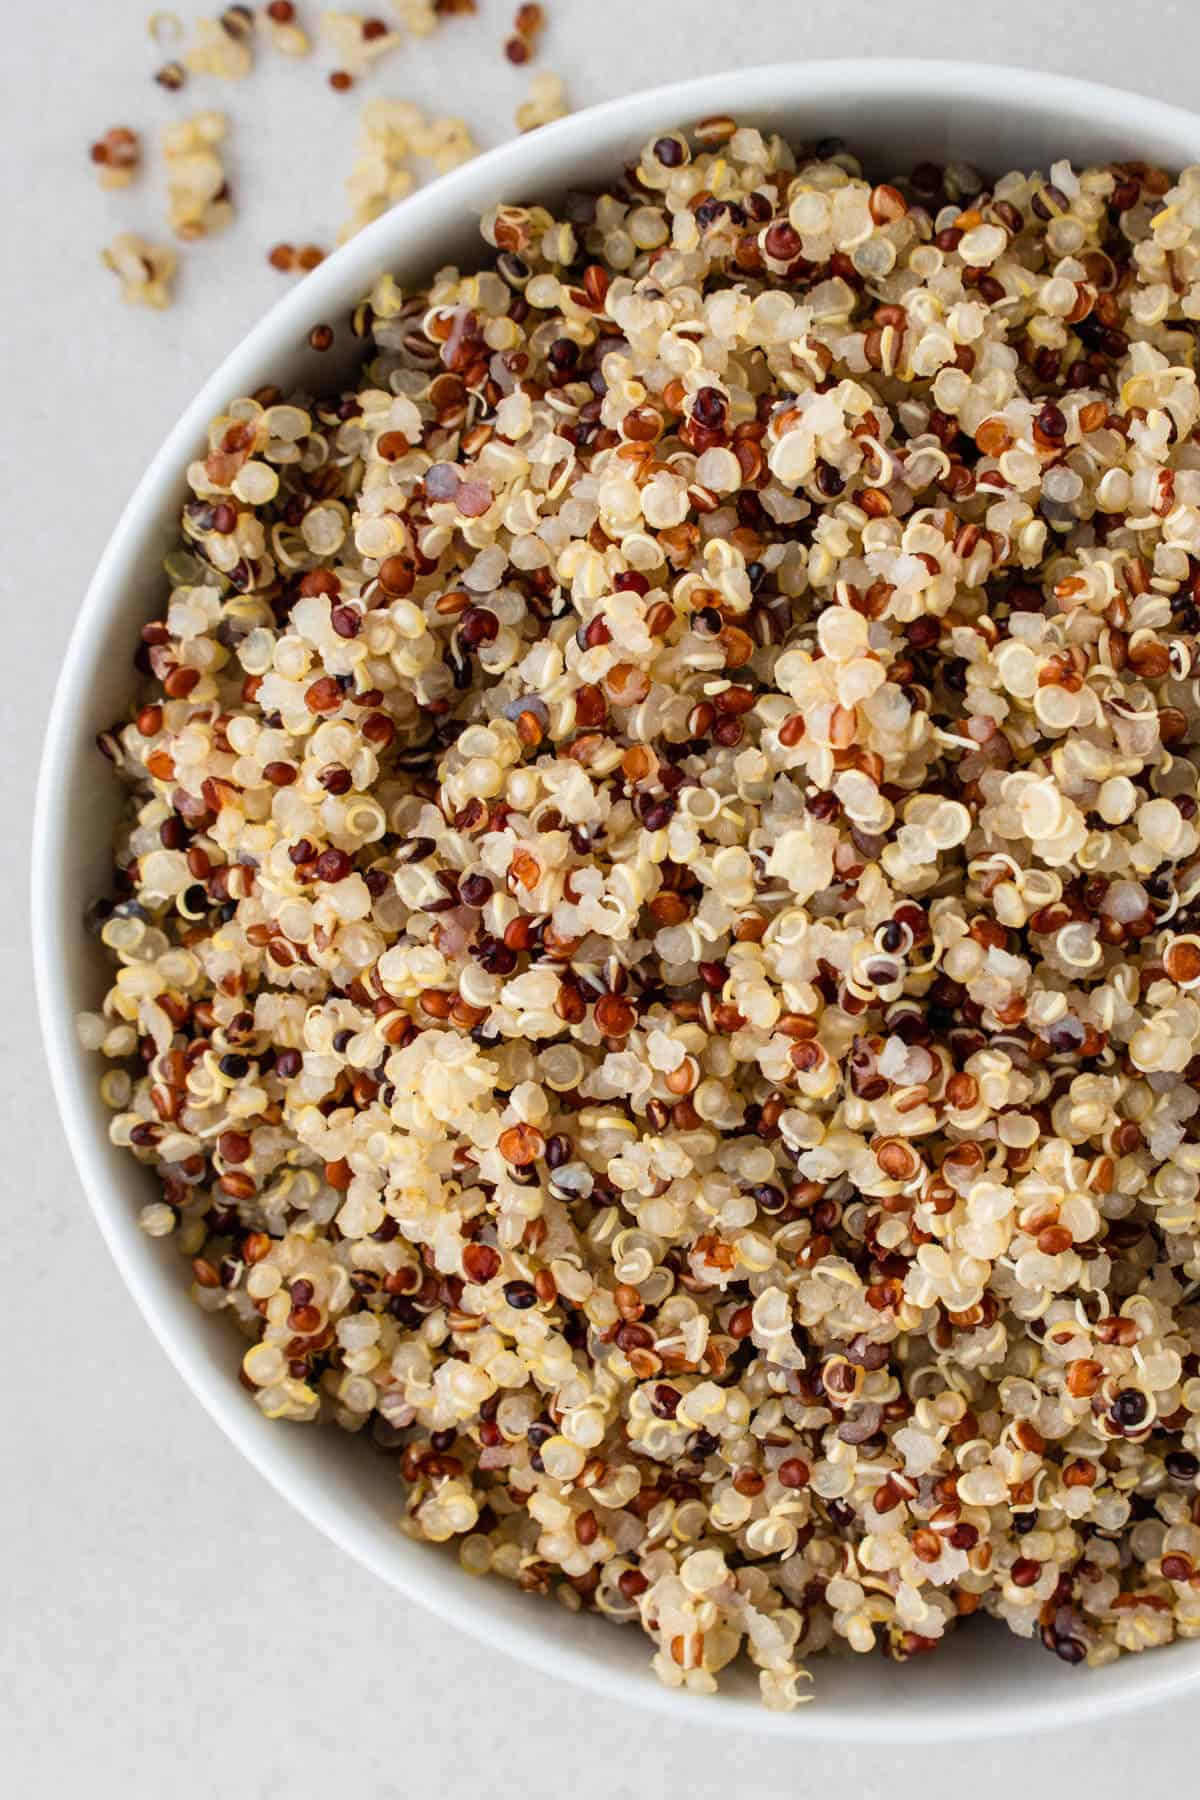 https://cookingwithayeh.com/wp-content/uploads/2021/04/How-to-Cook-Quinoa-1.jpg